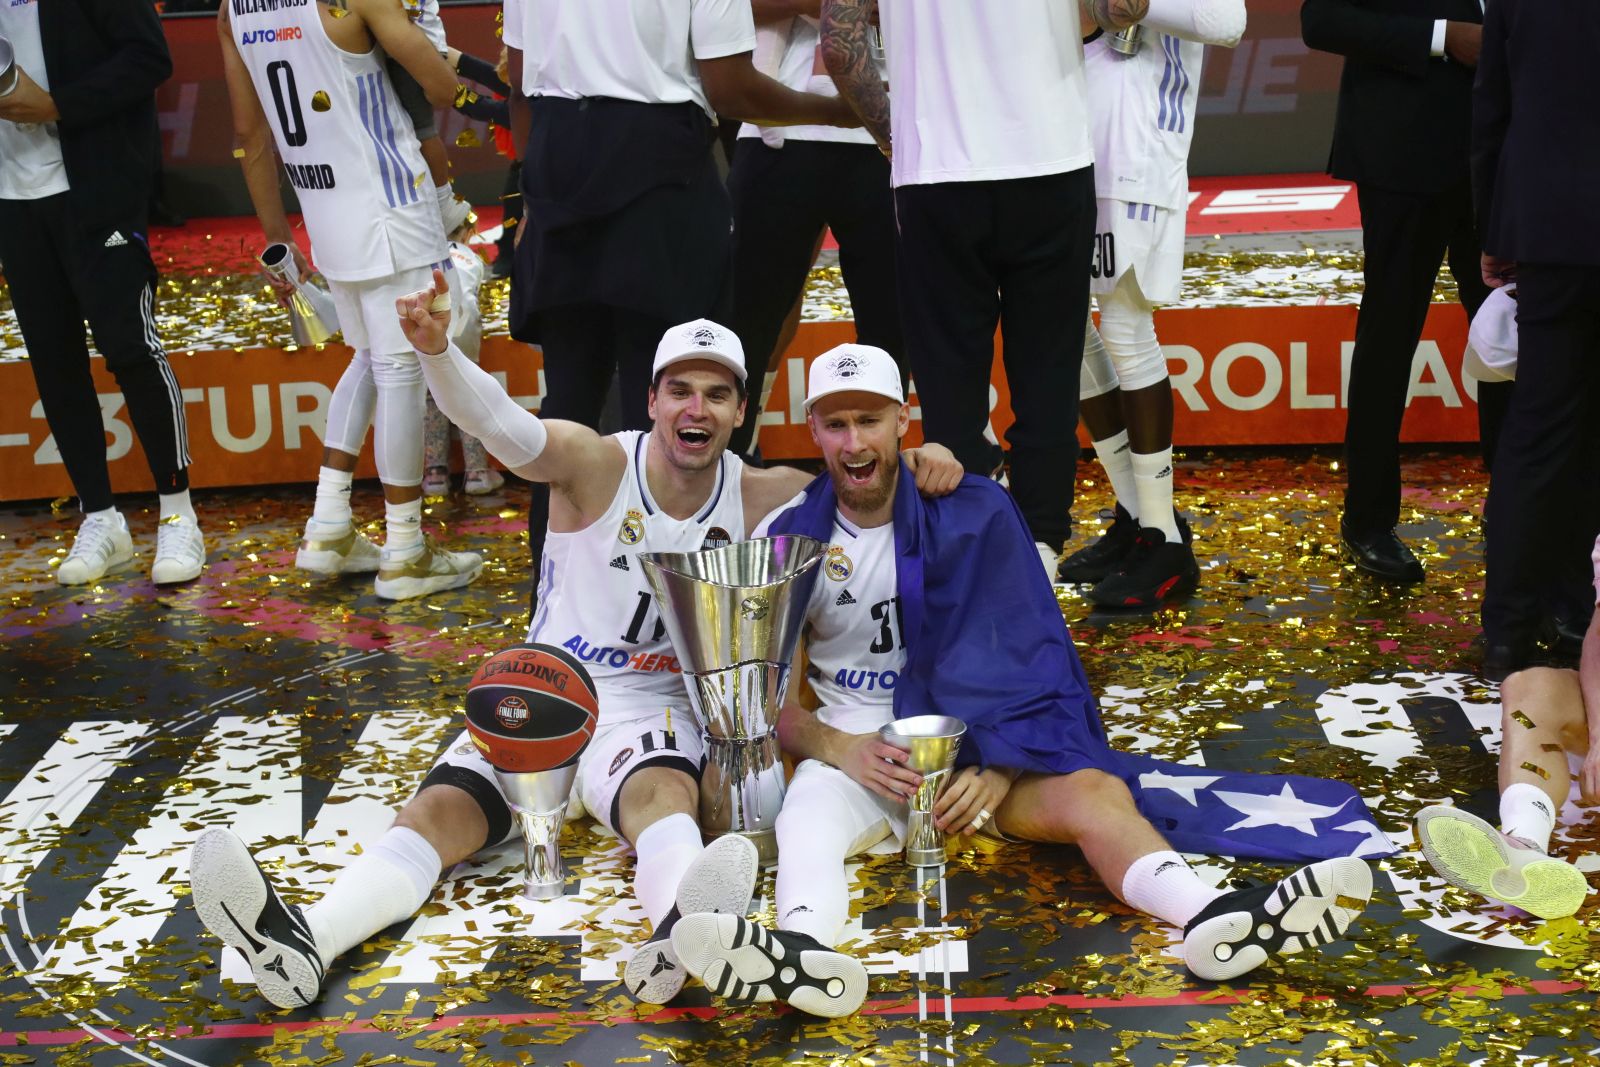 epa10644711 Real Madrid's Mario Hezonja (L) and Dzanan Musa celebrate with the trophy after winning the Euroleague Basketball final match between Olympiacos Piraeus and Real Madrid in Kaunas, Lithuania, 21 May 2023.  EPA/TOMS KALNINS